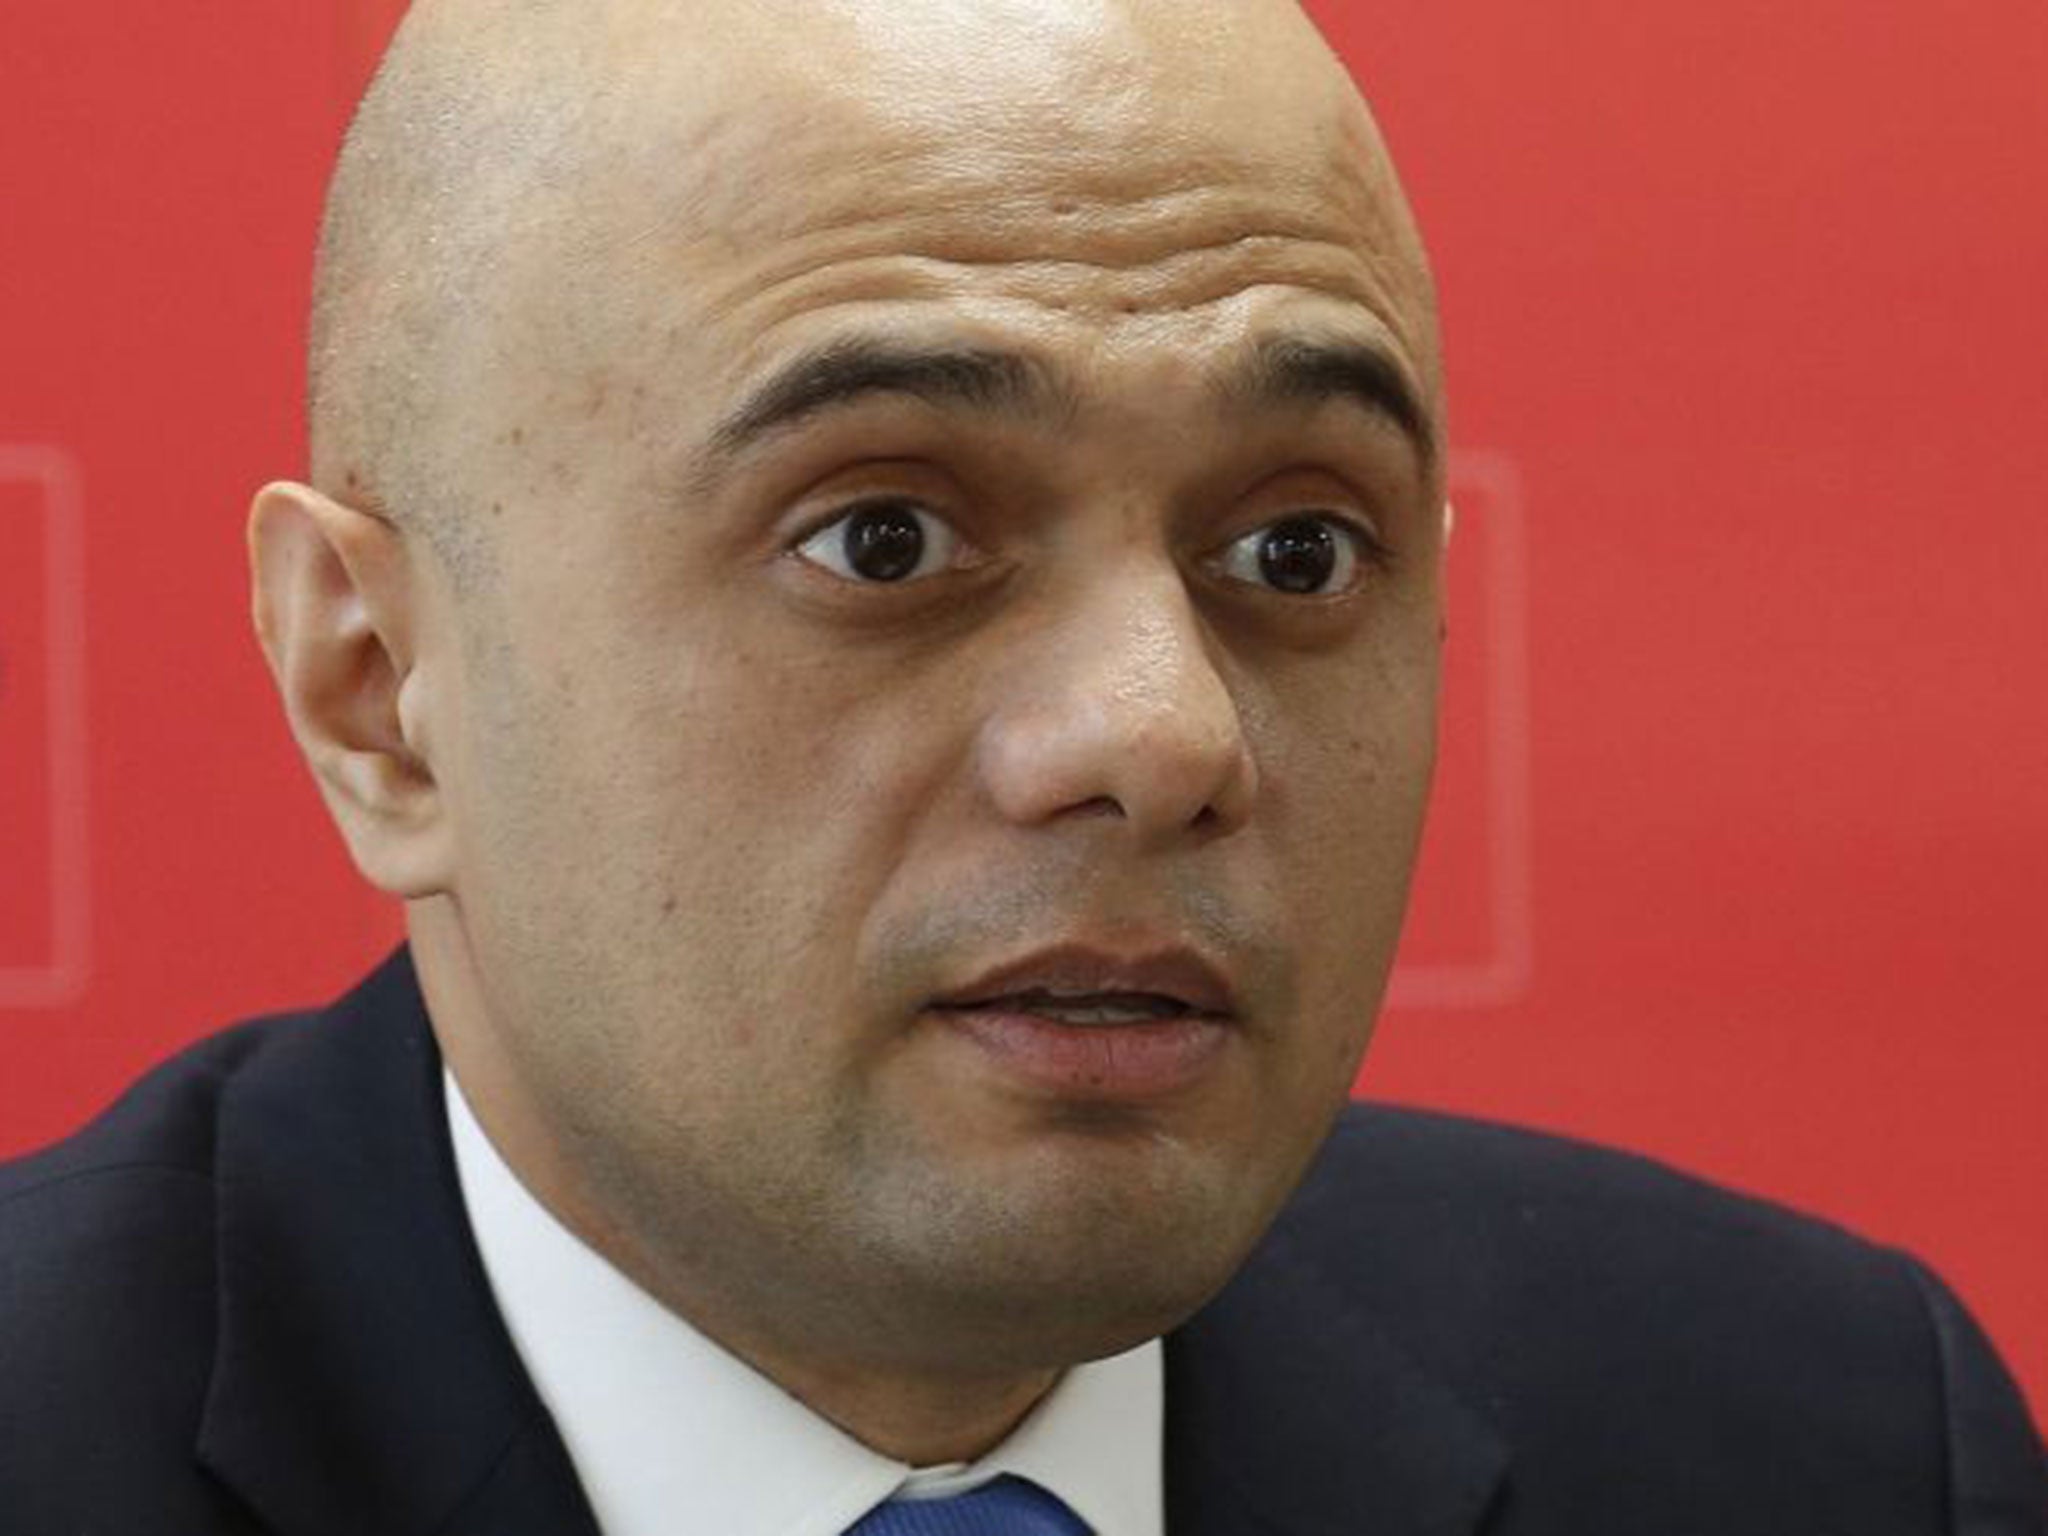 Sajid Javid, MP for Bromsgrove, is to become the new Culture Secretary after Maria Miller's resignation